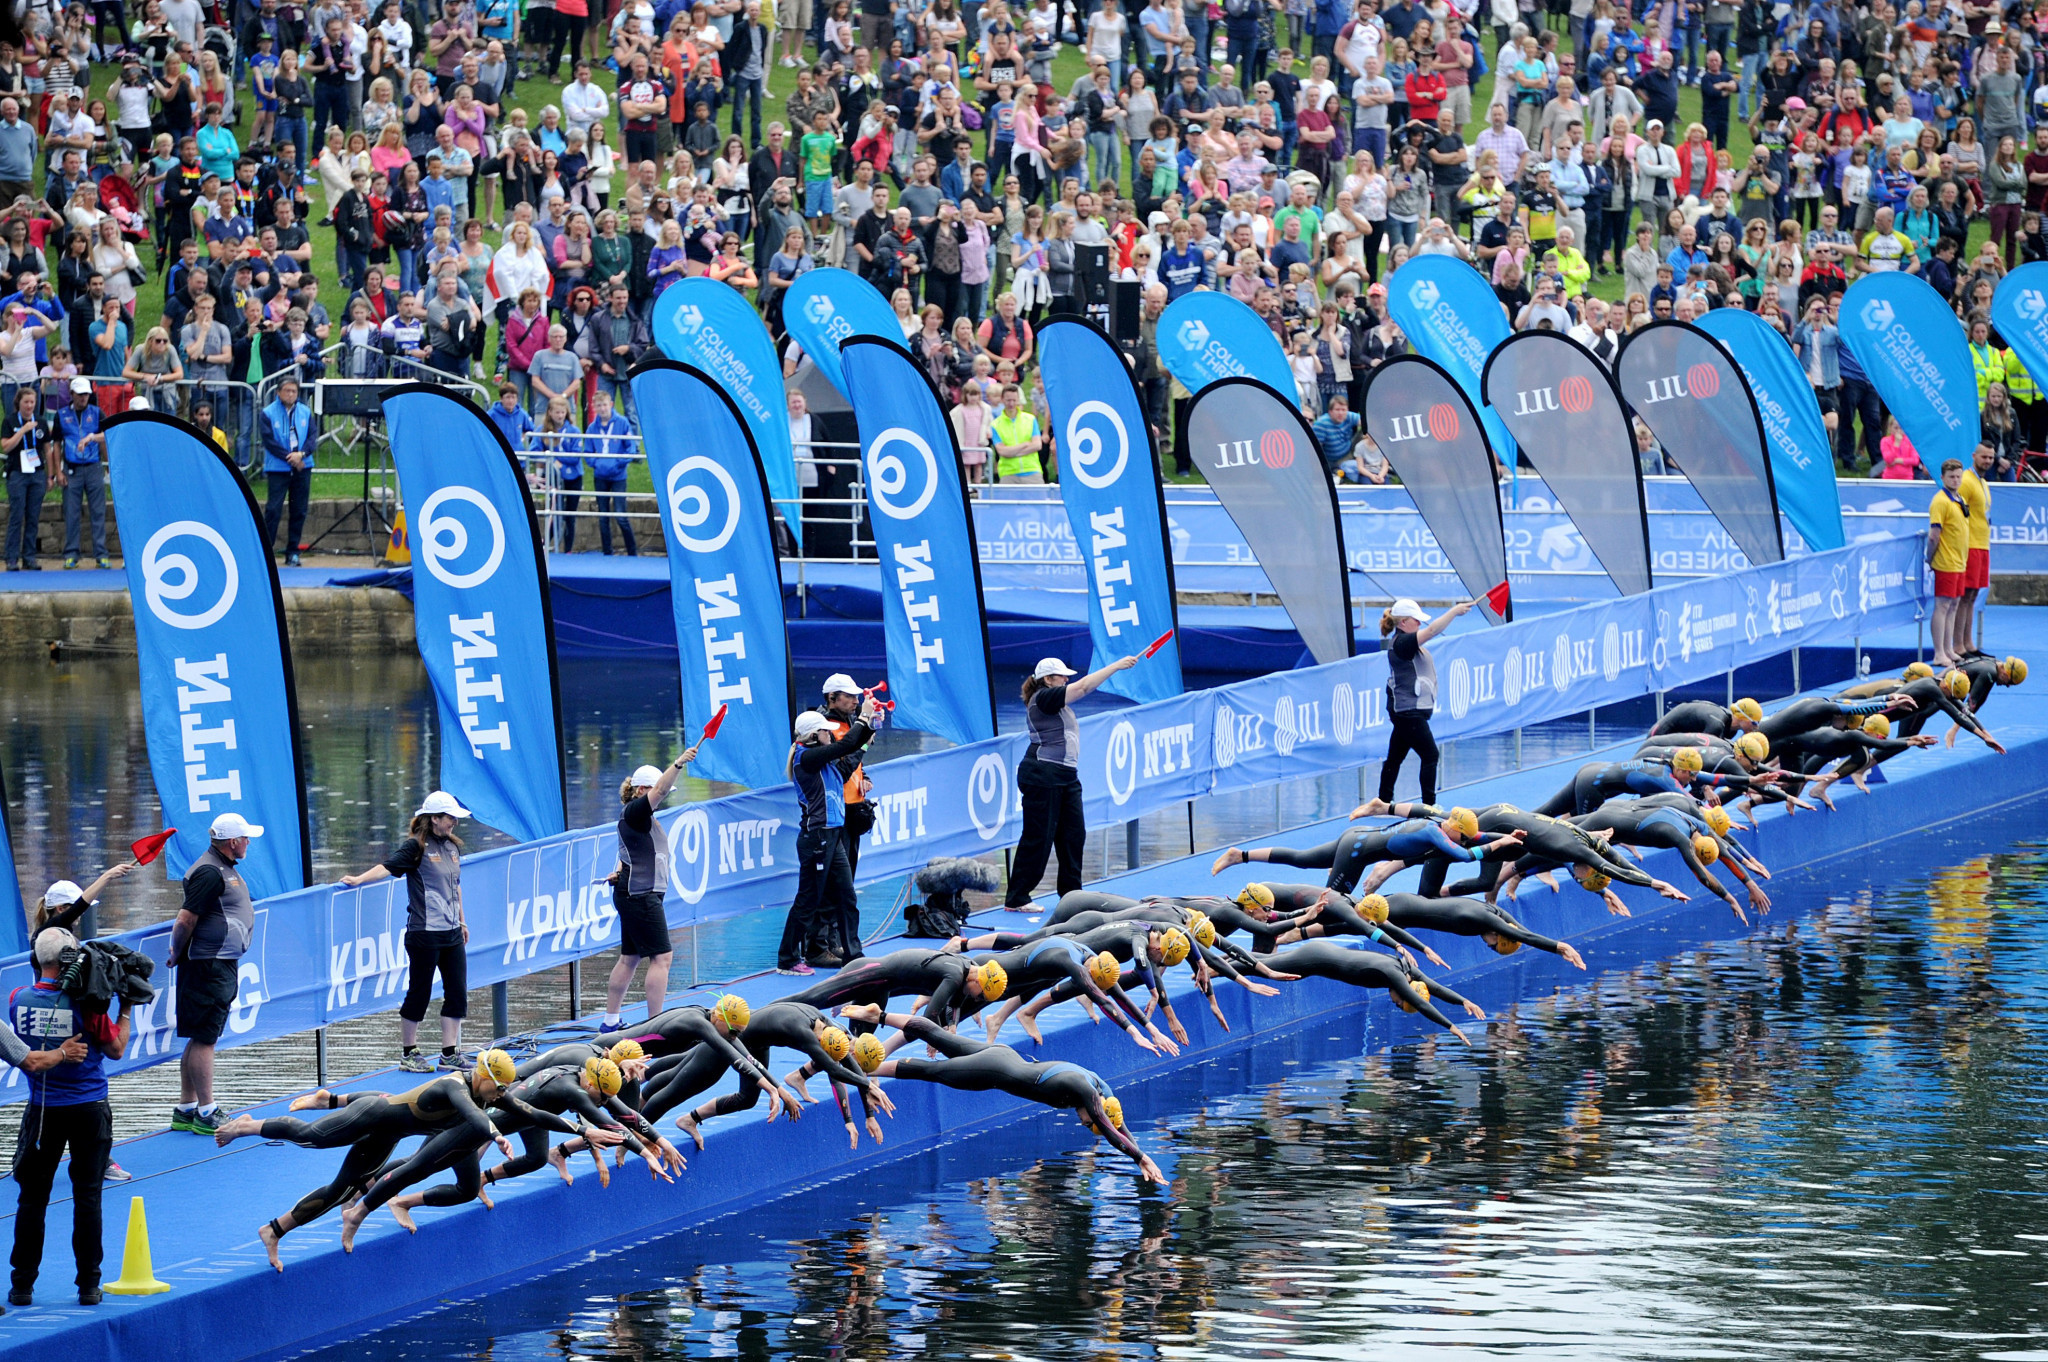 The International Triathlon Union World Series begins the first of two legs in Great Britain this weekend in Leeds ©ITU